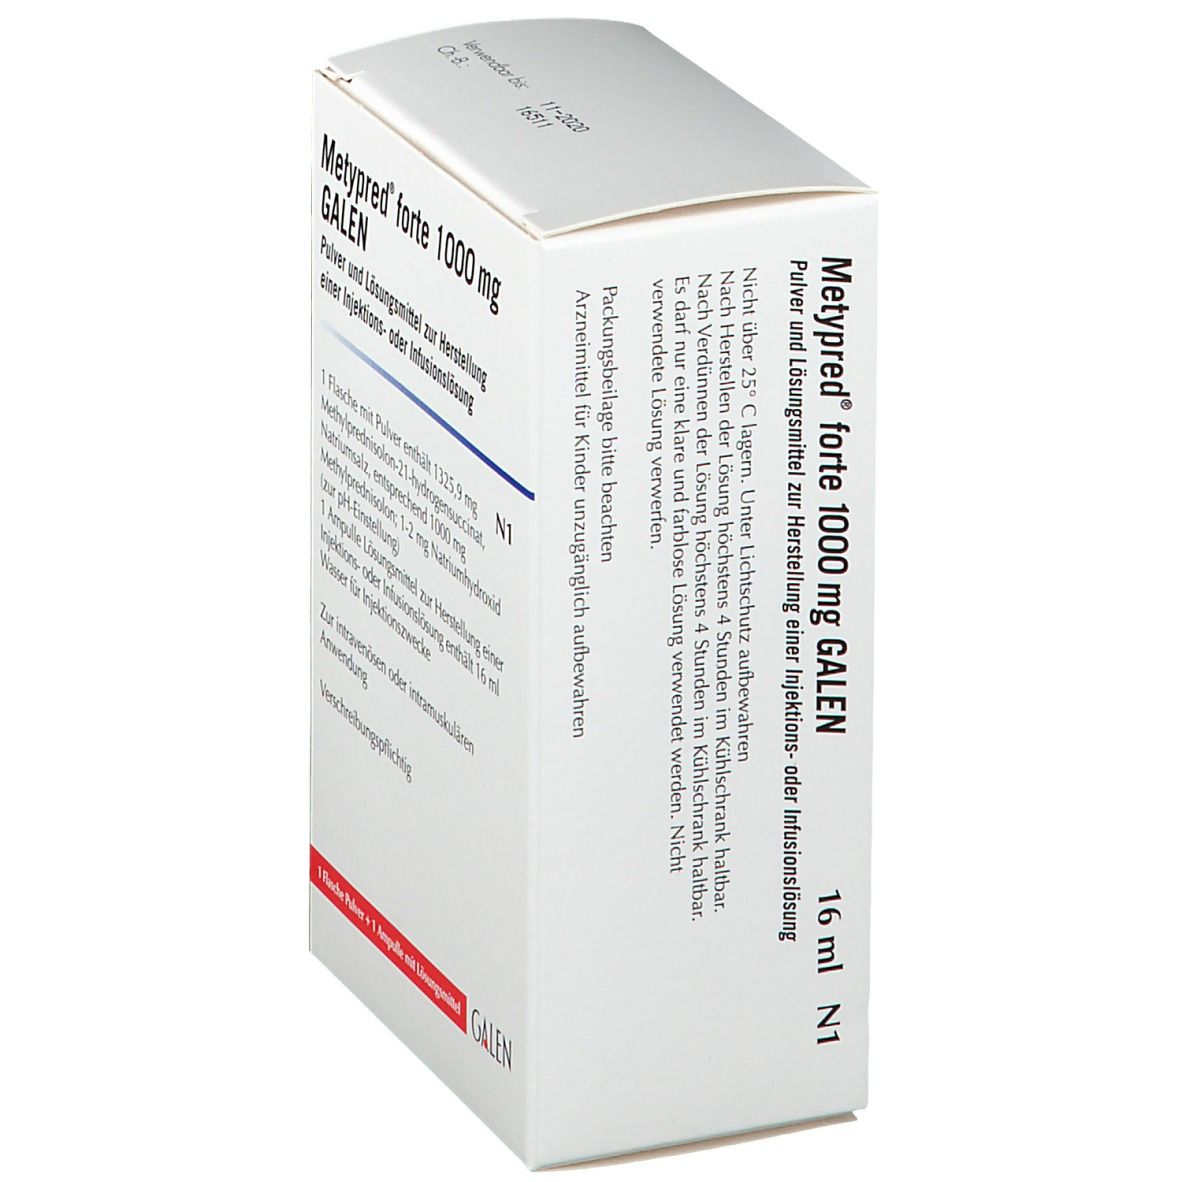 Metypred® forte 100 mg GALEN